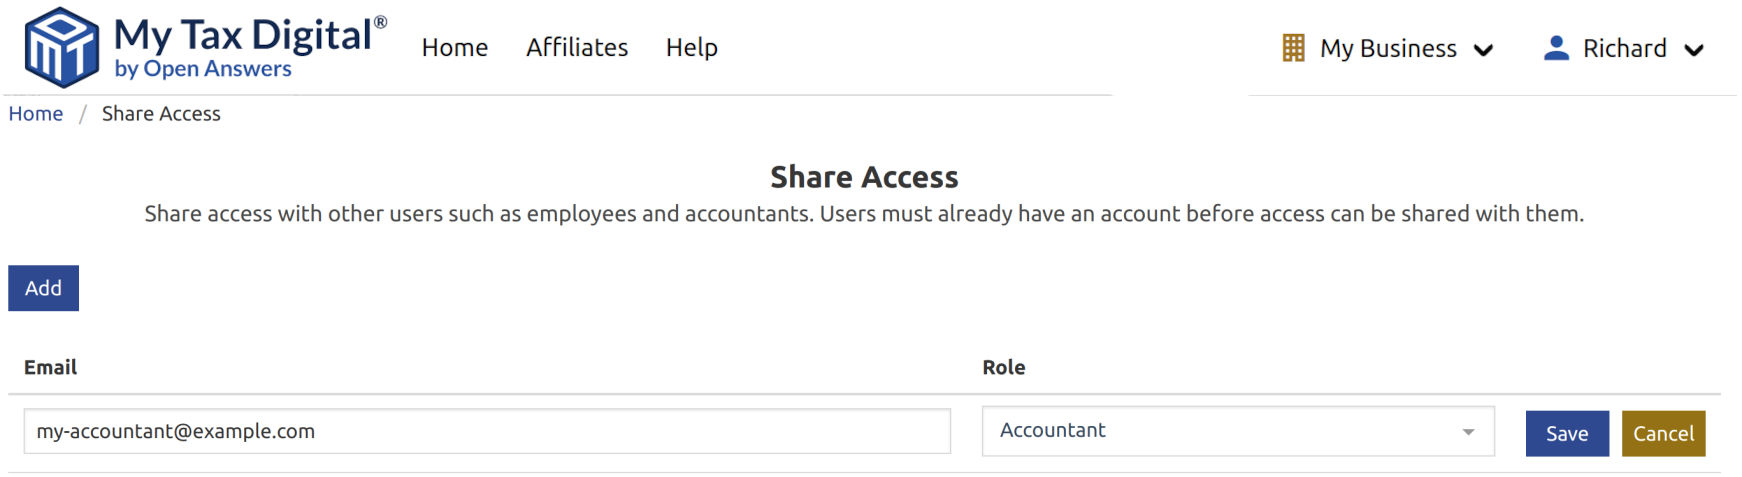 My Tax Digital Sharing access to a business